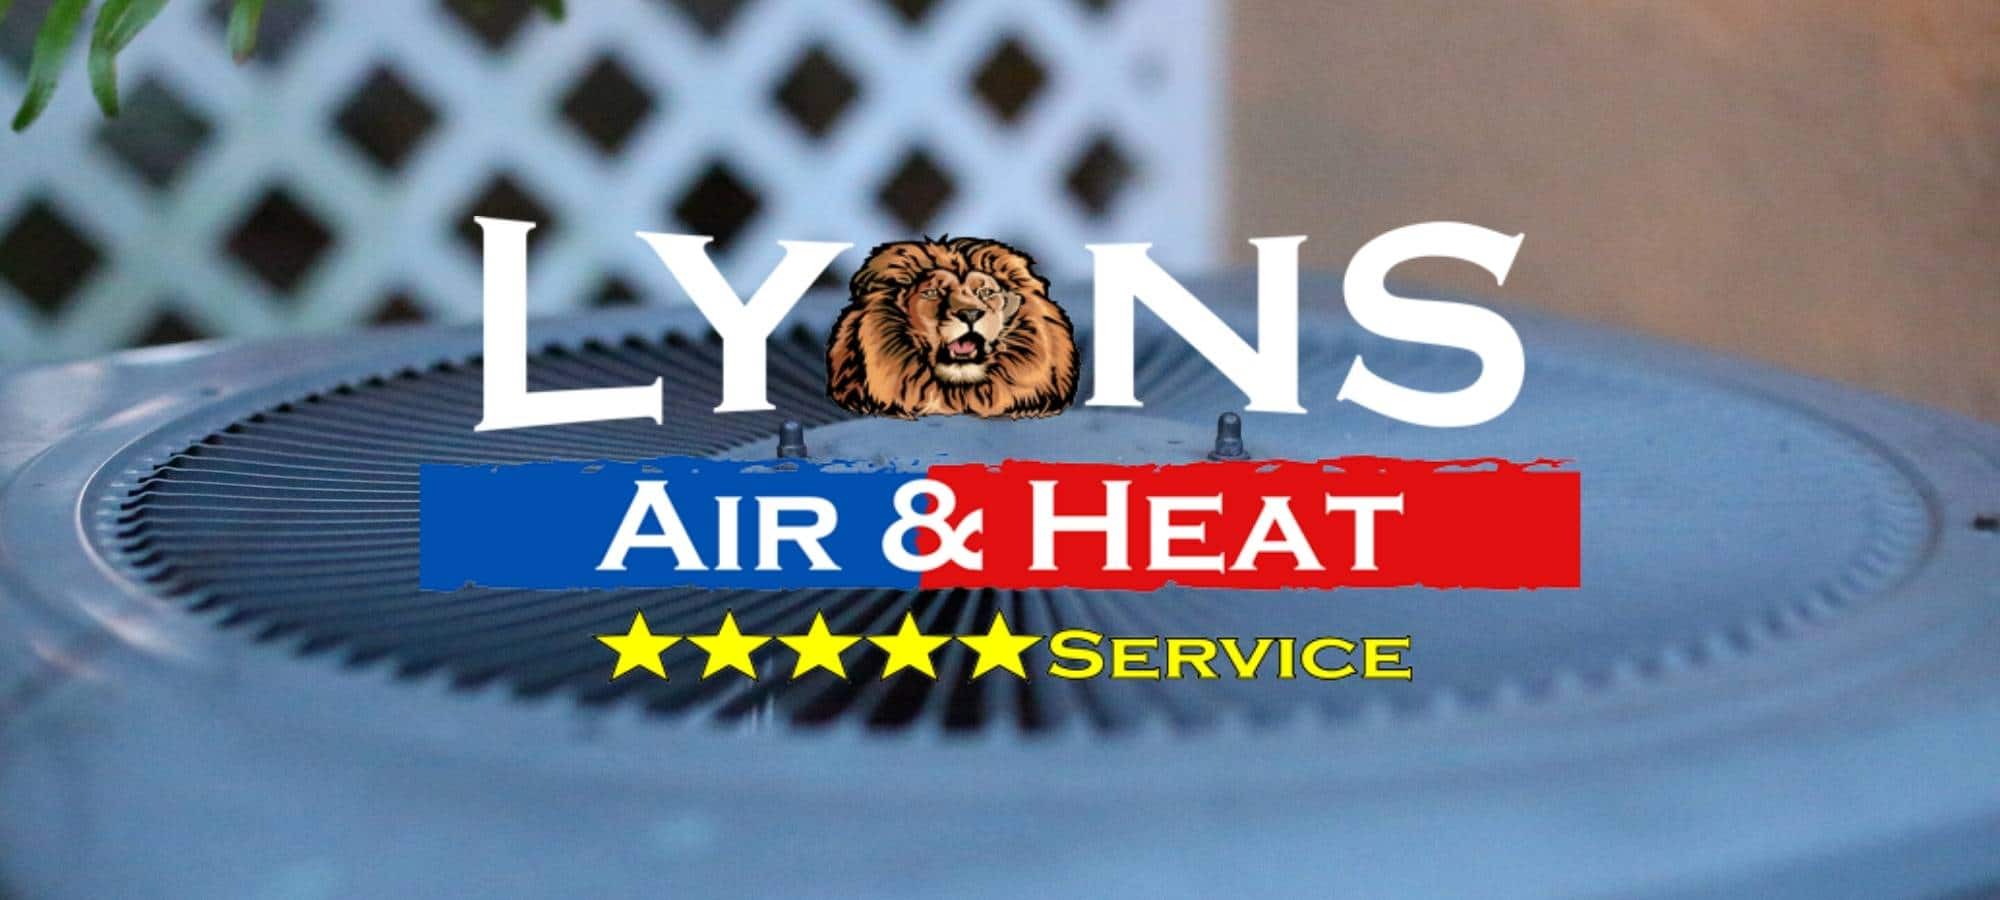 rockwall air conditioning services